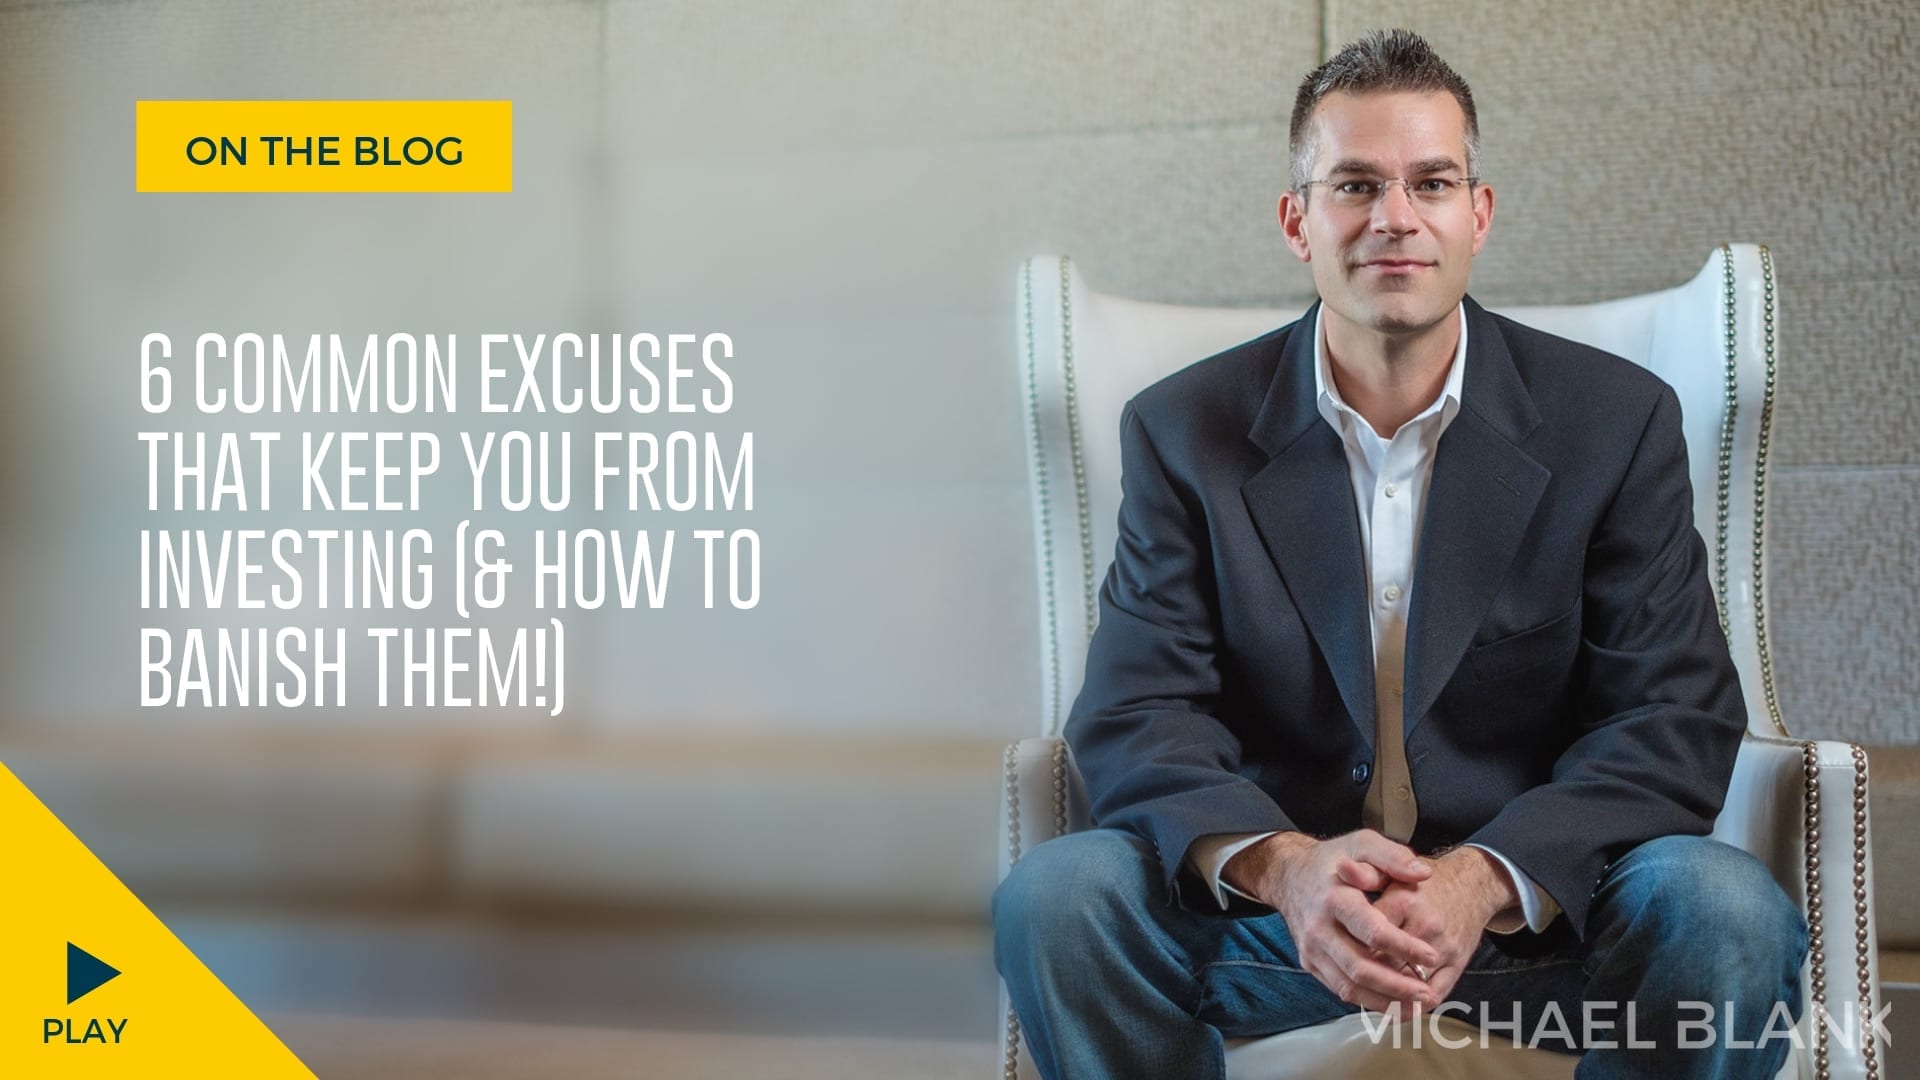 6 Common Excuses That Keep You From Investing (& How to Banish Them!)